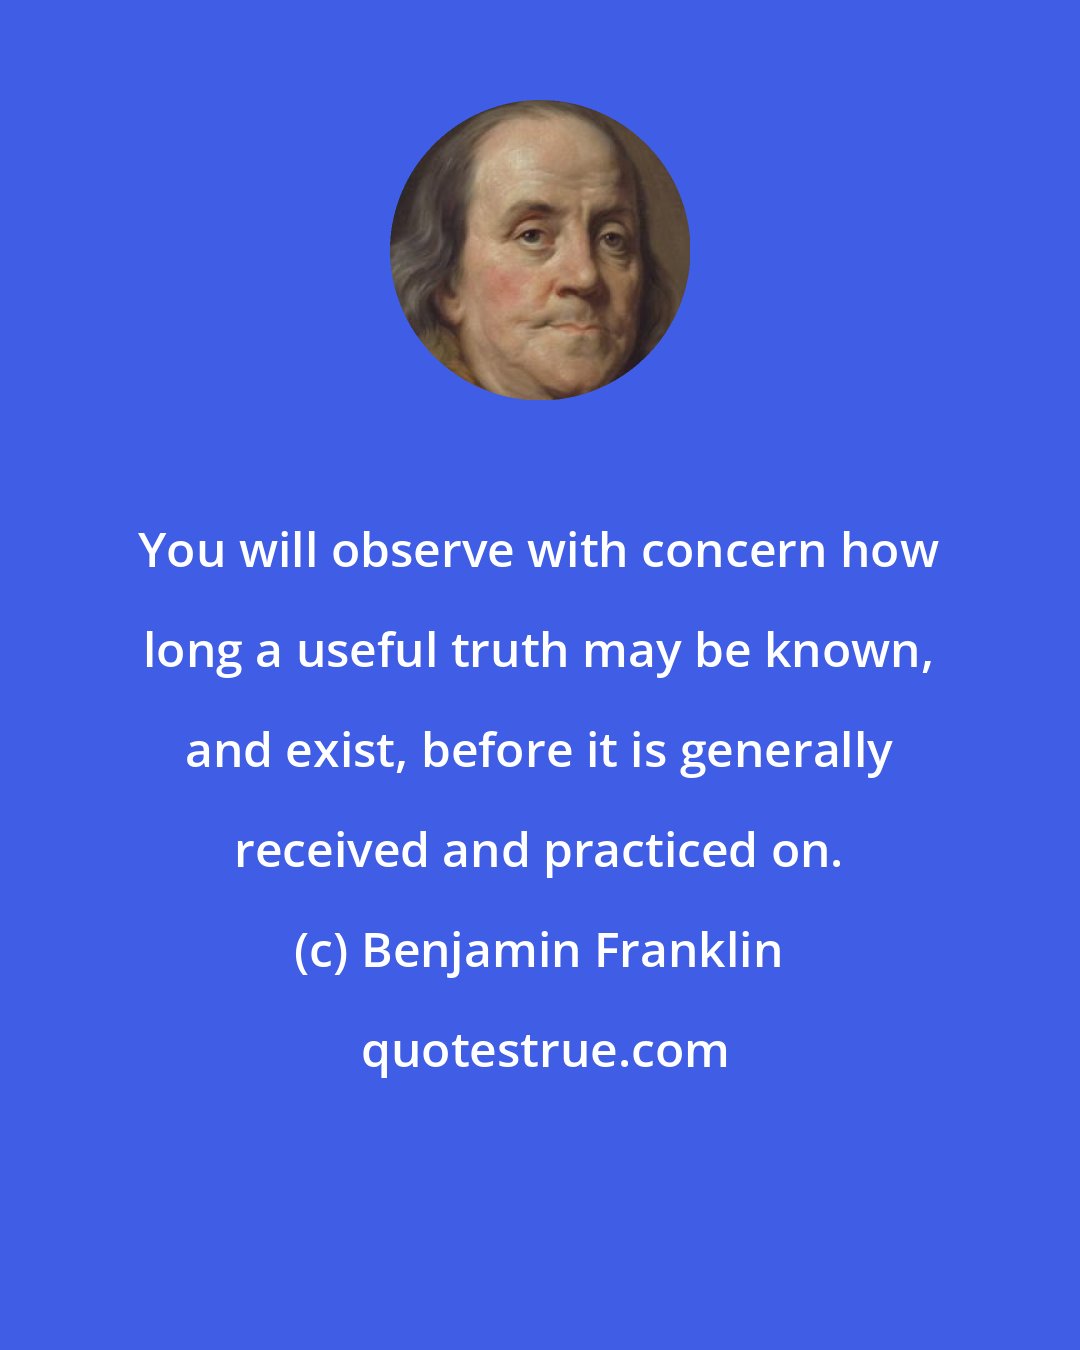 Benjamin Franklin: You will observe with concern how long a useful truth may be known, and exist, before it is generally received and practiced on.